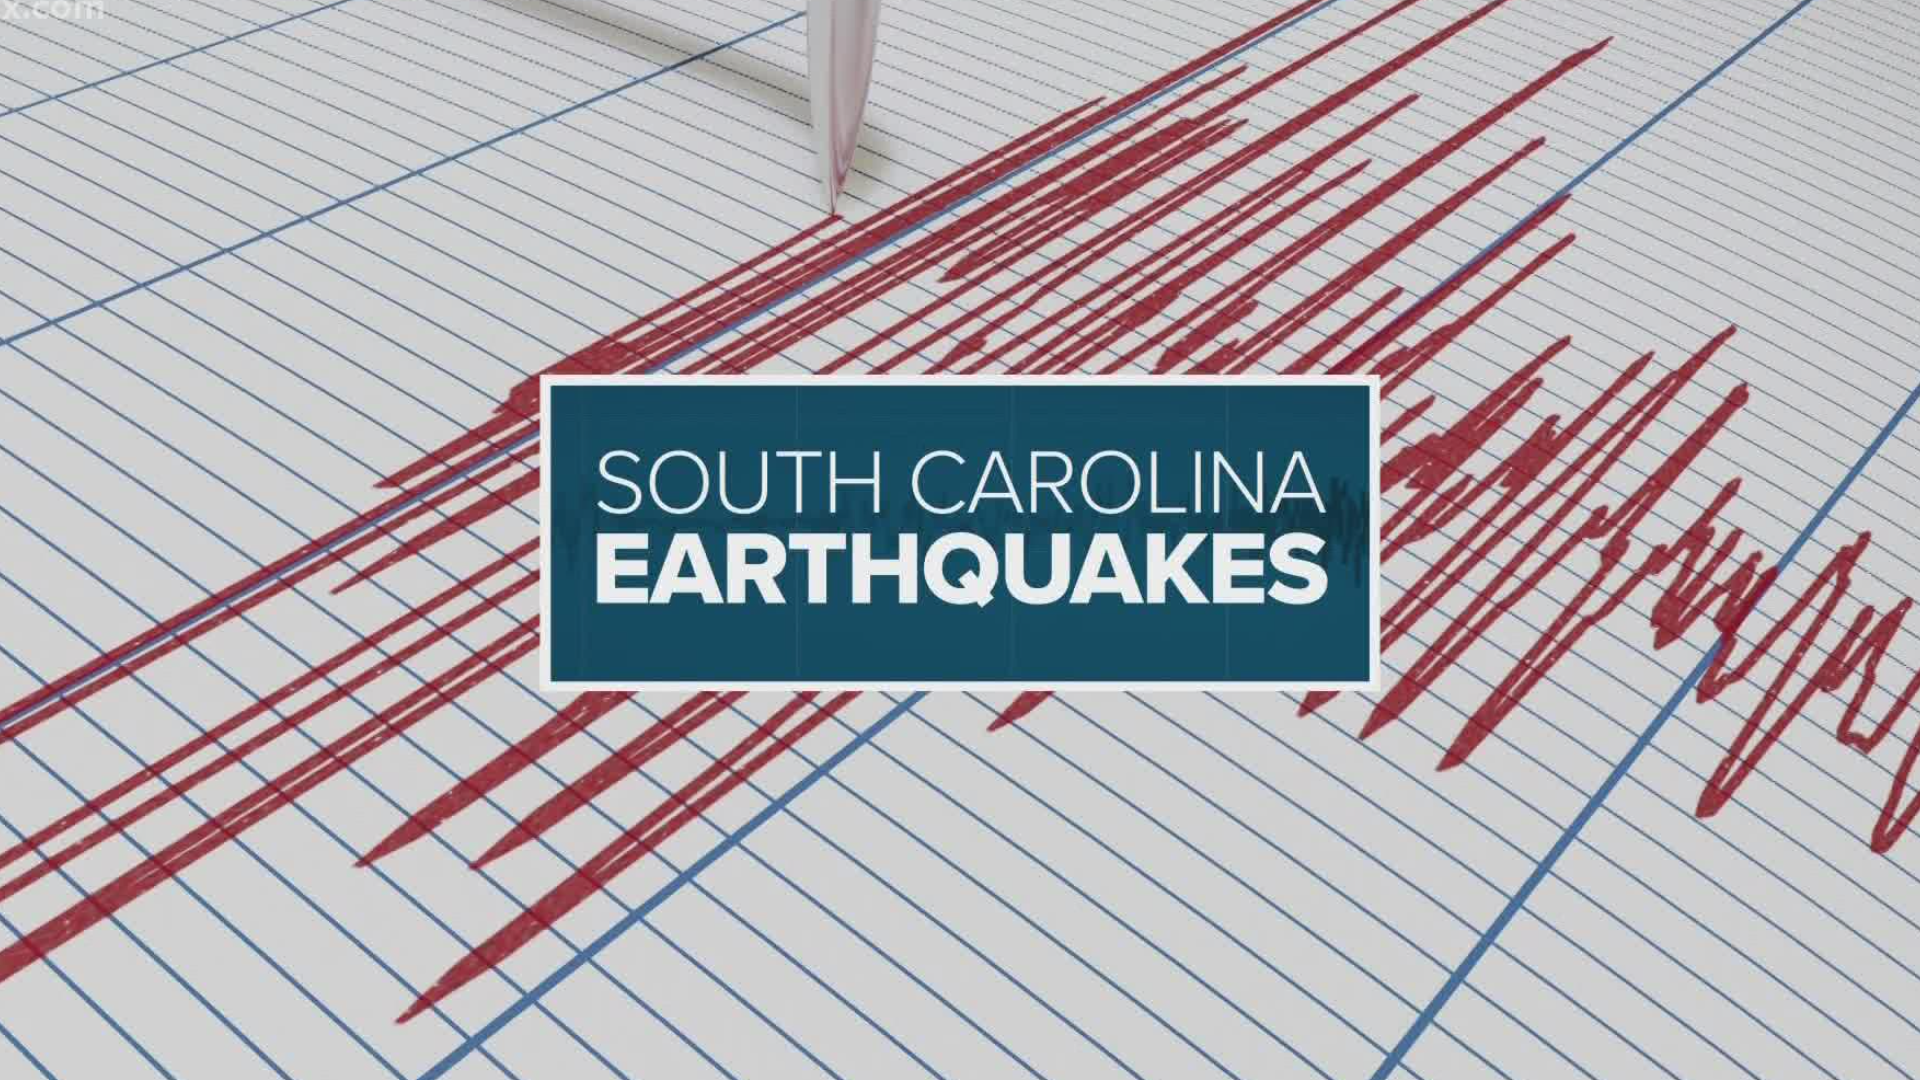 Scientists have given three possible scenarios, assuming that the rate of small earthquakes continues over the next month.